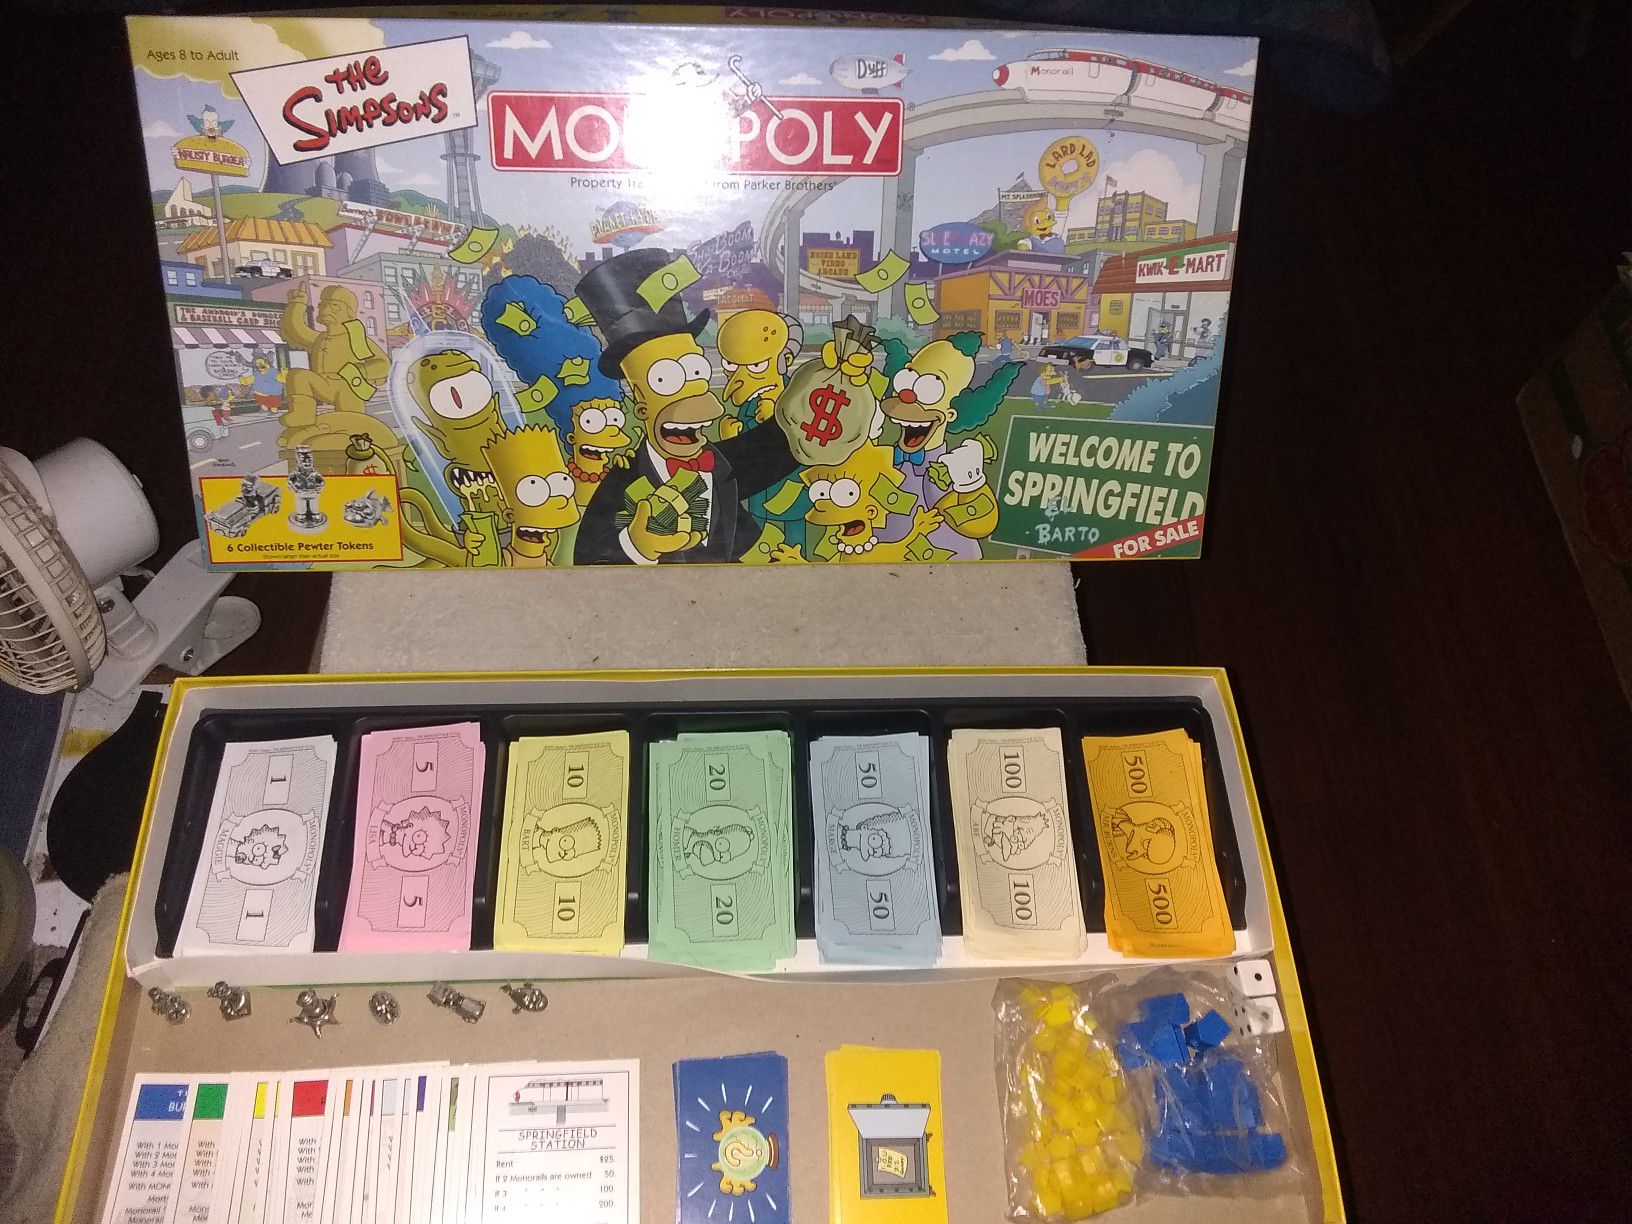 The Simpsons monopoly